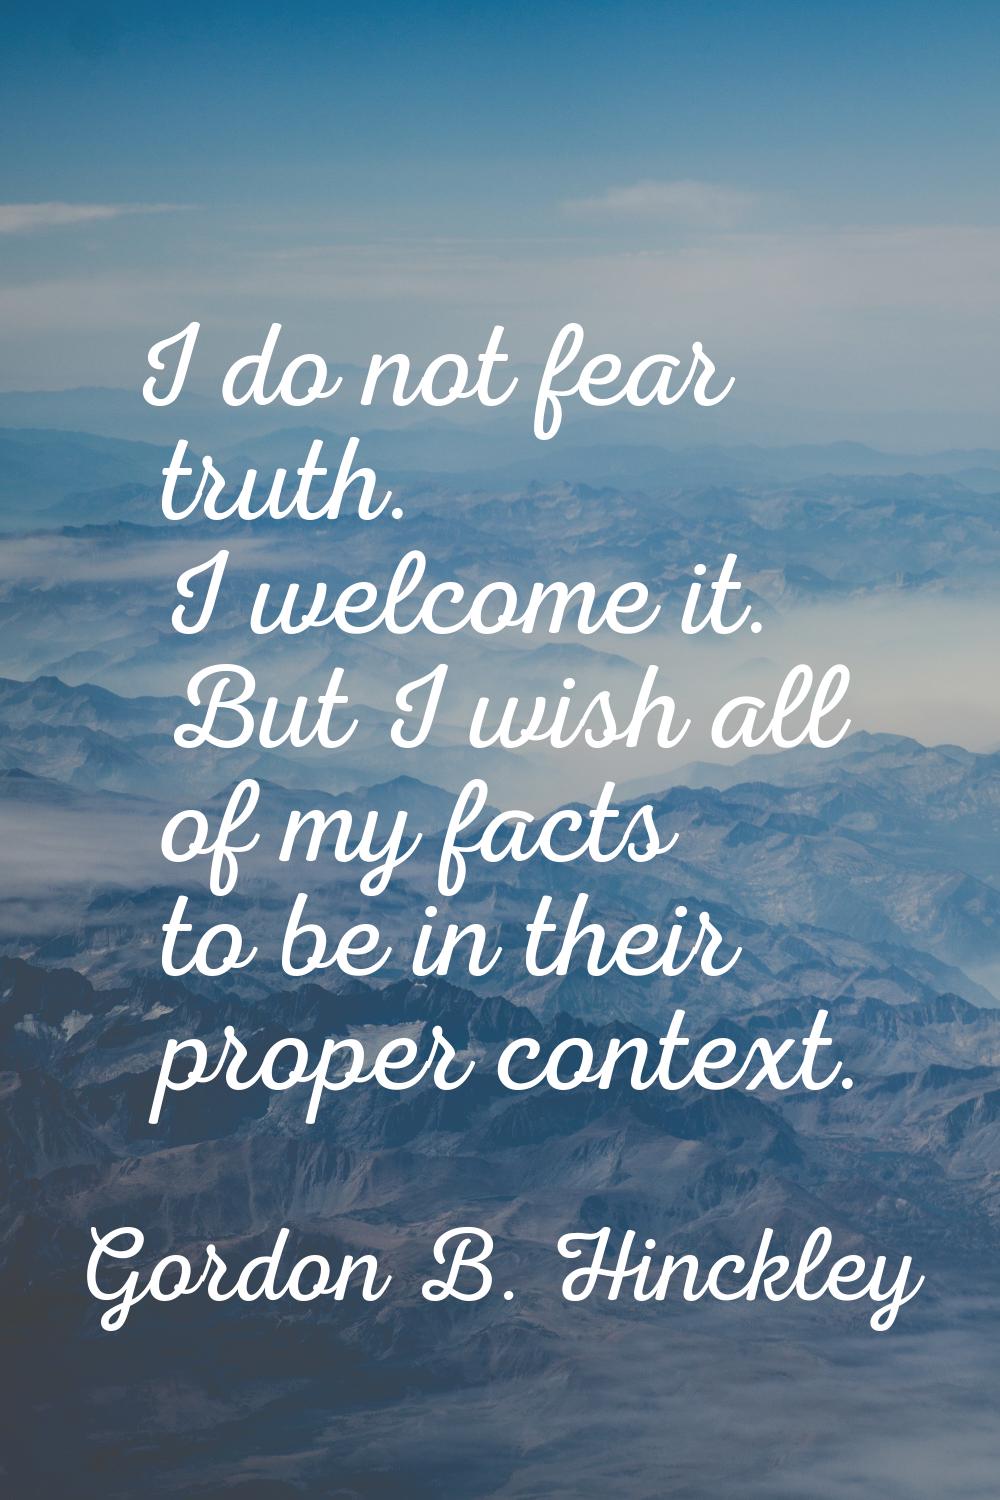 I do not fear truth. I welcome it. But I wish all of my facts to be in their proper context.